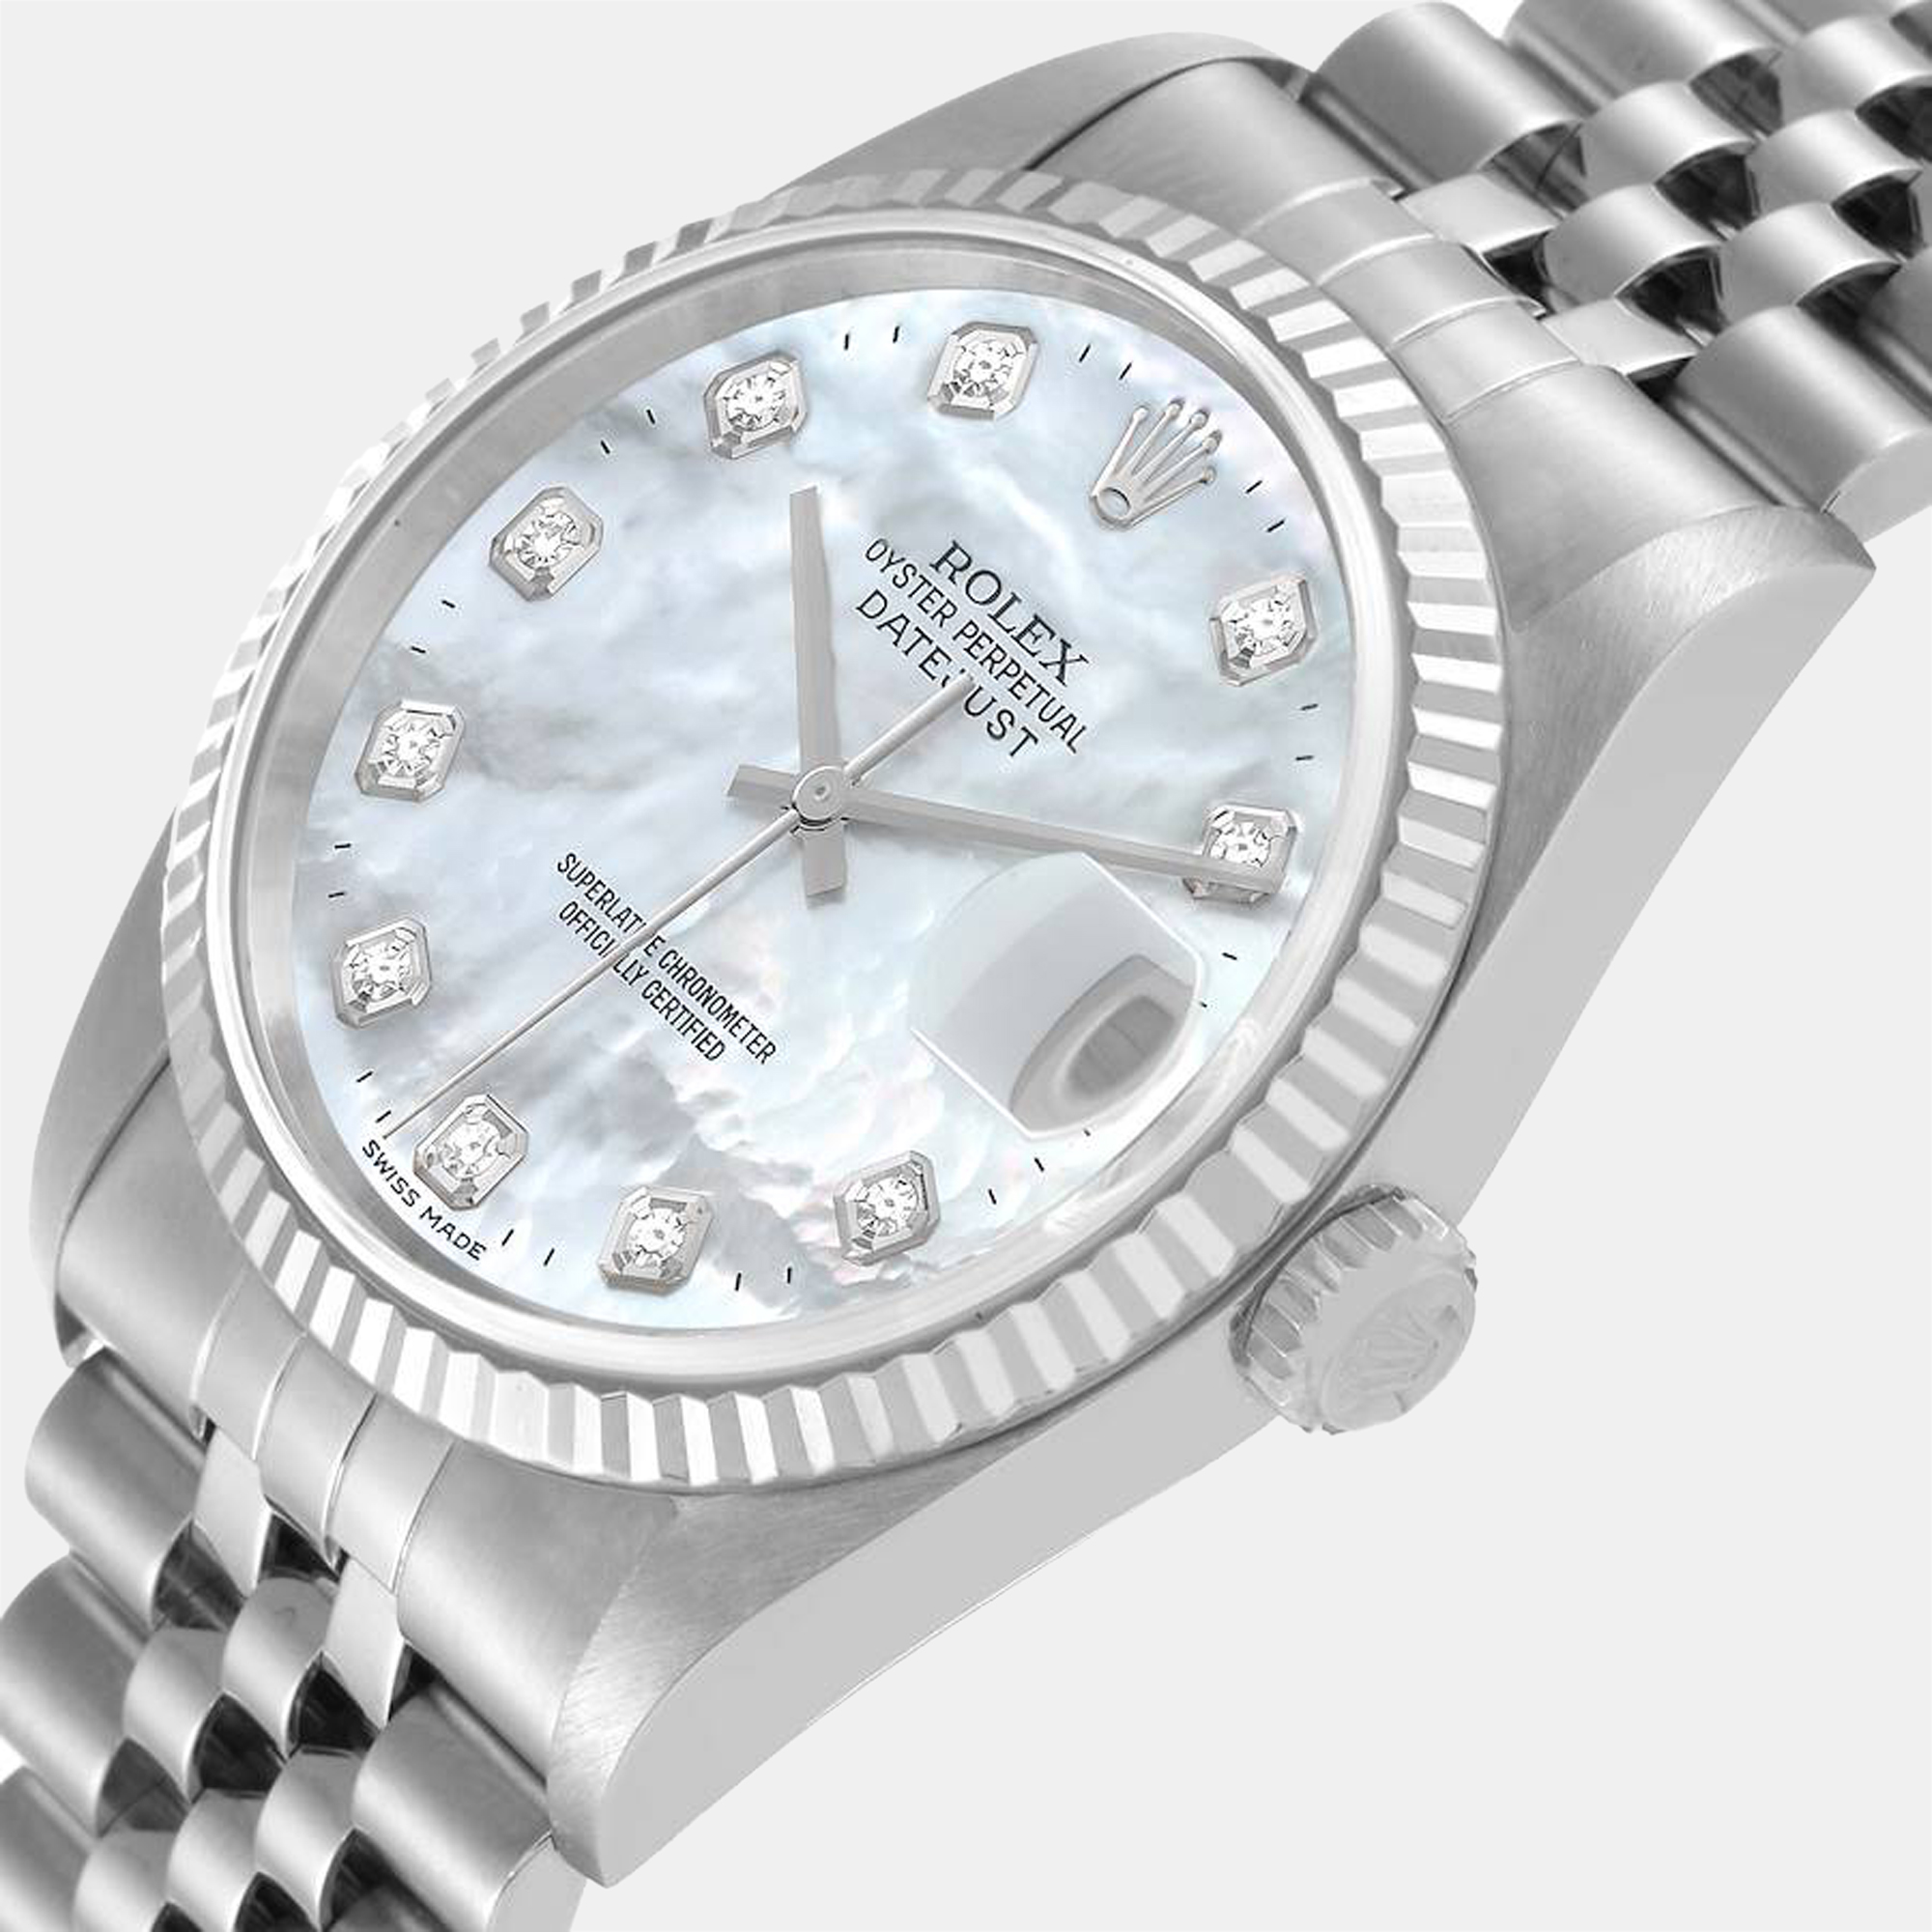 

Rolex MOP Diamonds 18k White Gold And Stainless Steel Datejust 16234 Men's Wristwatch 36 mm